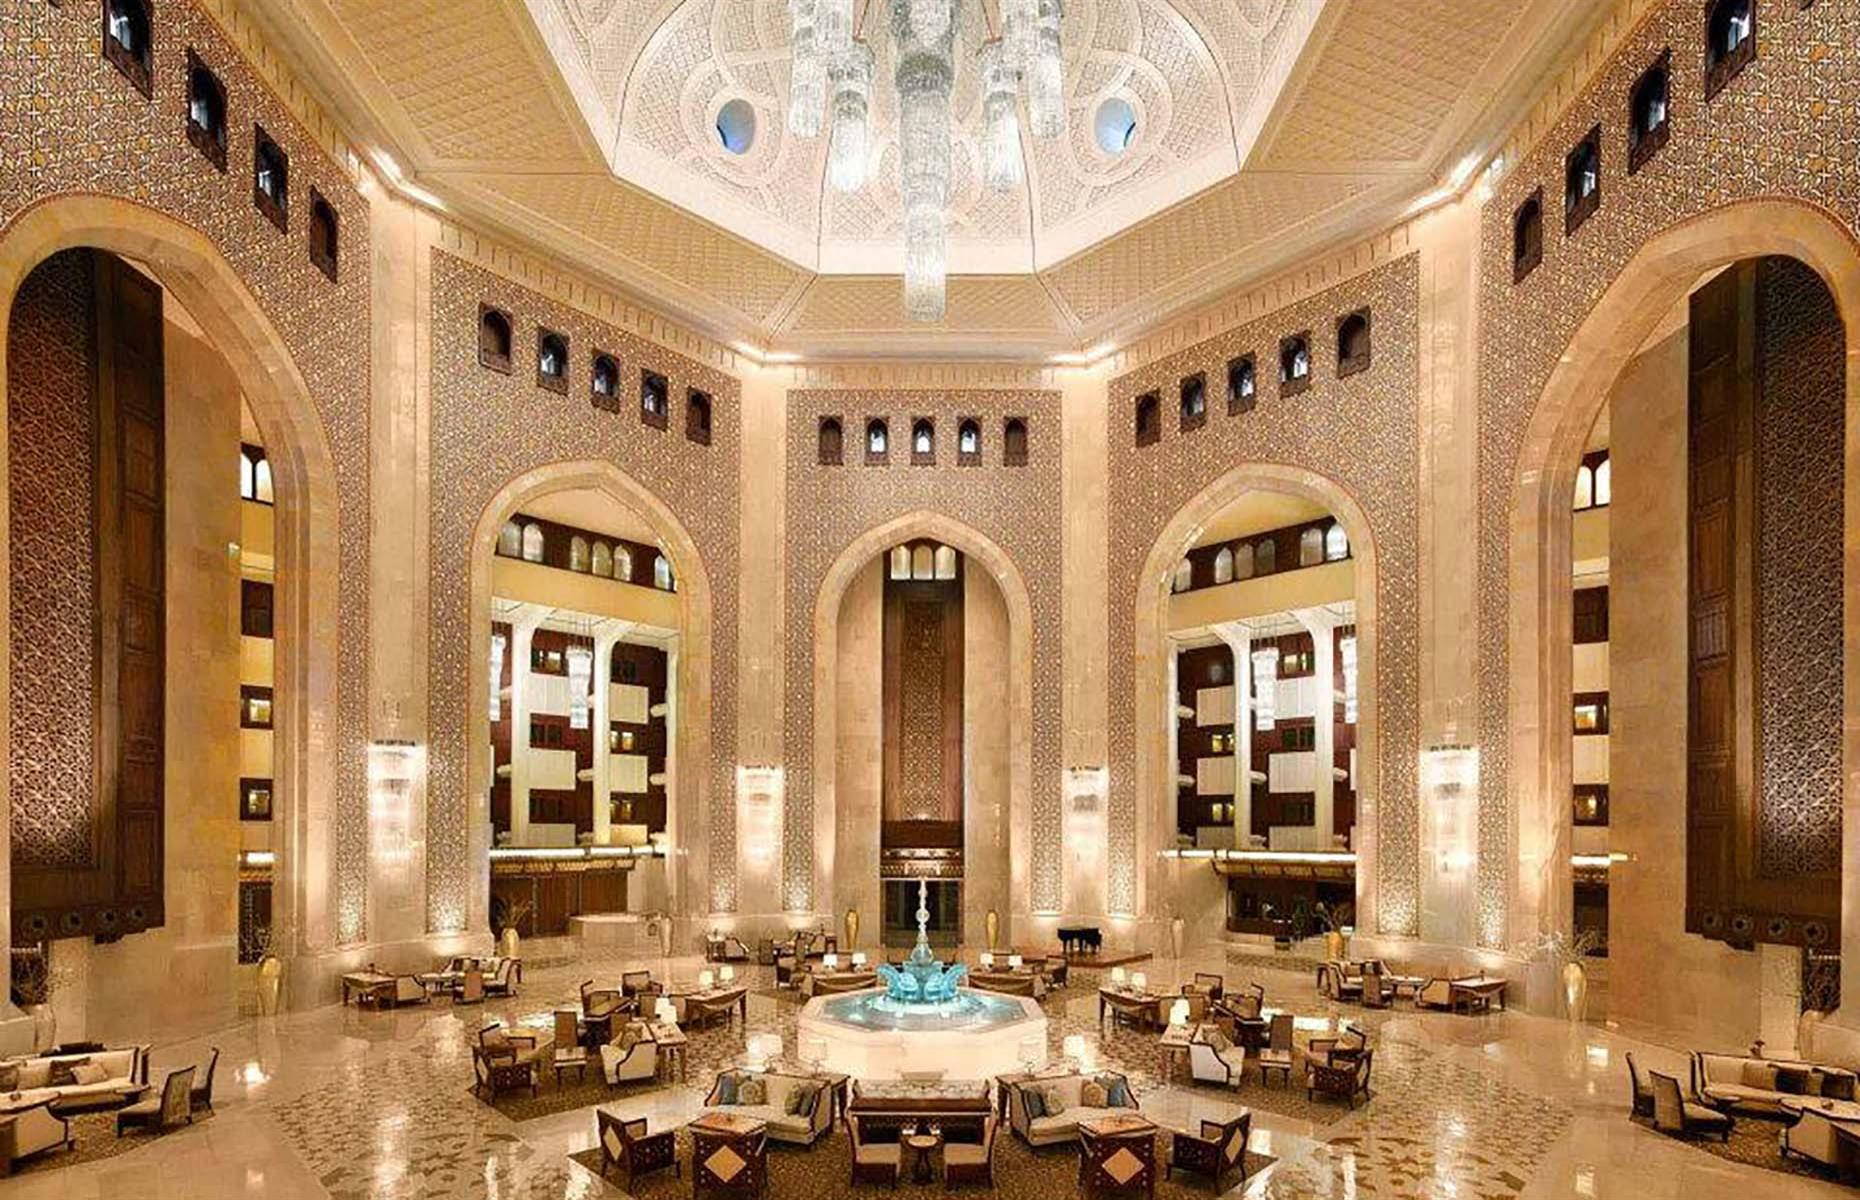 These Are the World's Most Dazzling Hotel Lobbies